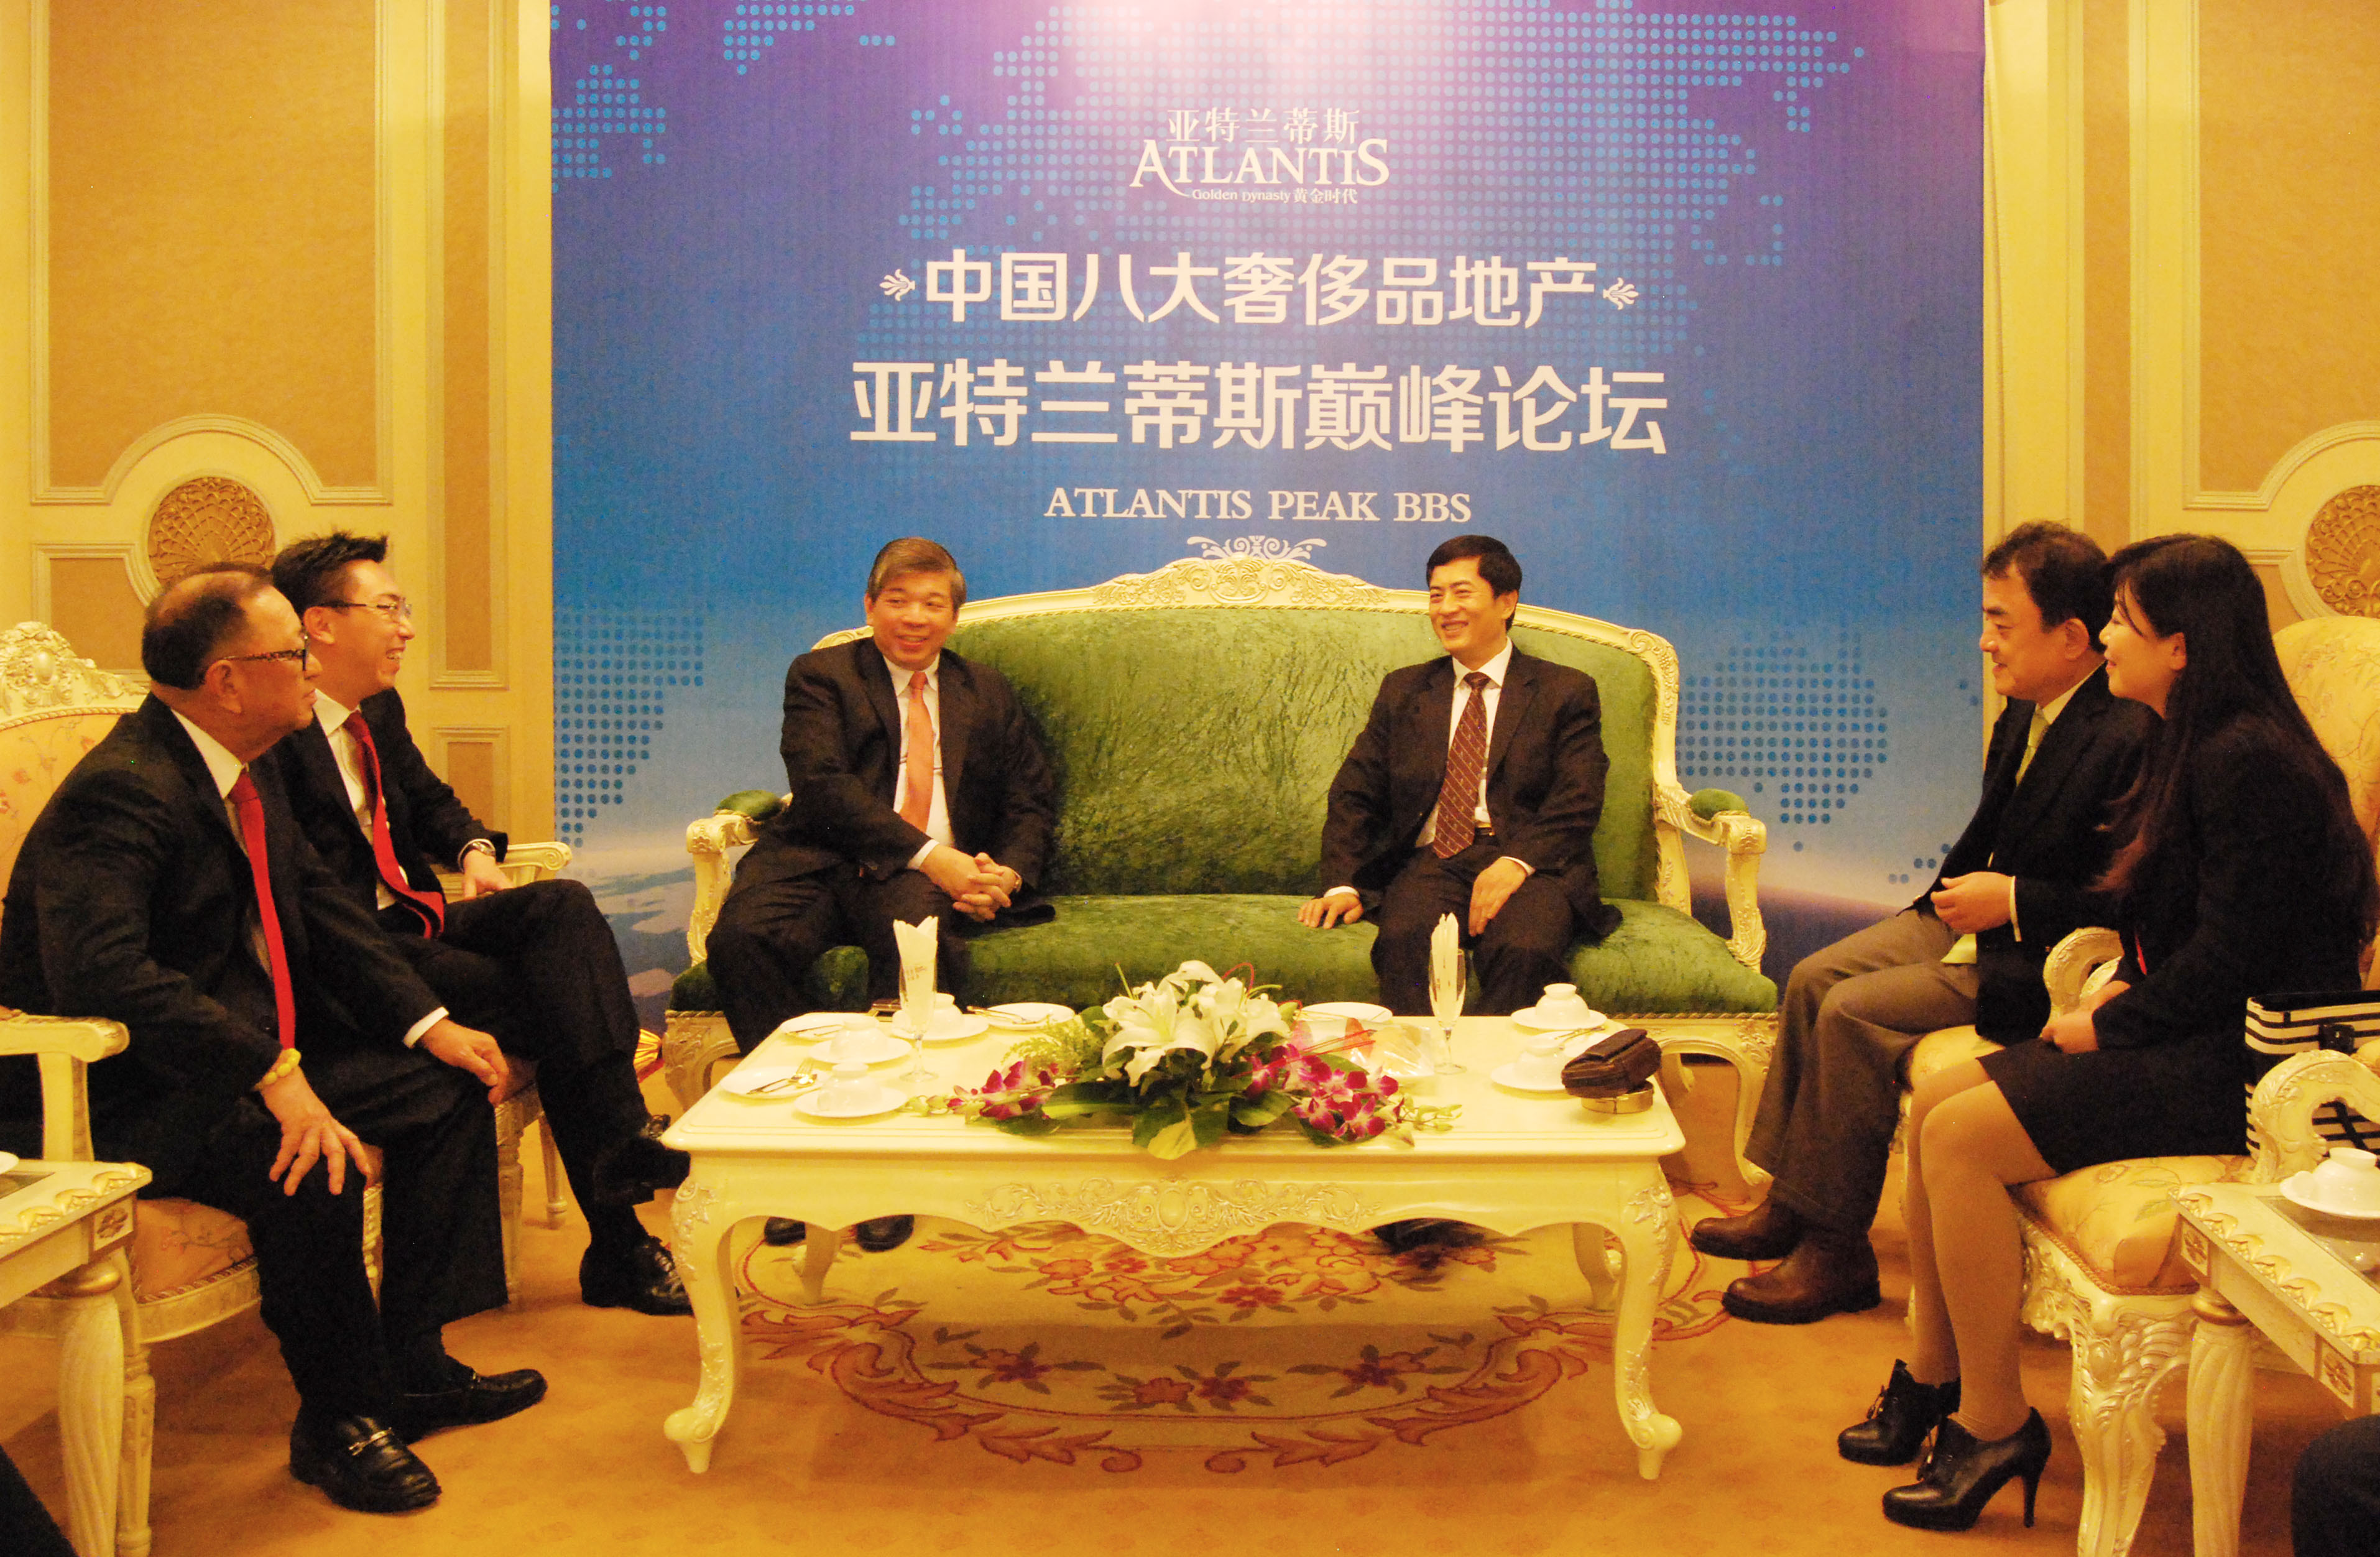 President Bin Chen sitting with President Songsheng Zhang of the Singapore Chinese Chamber of Commerce